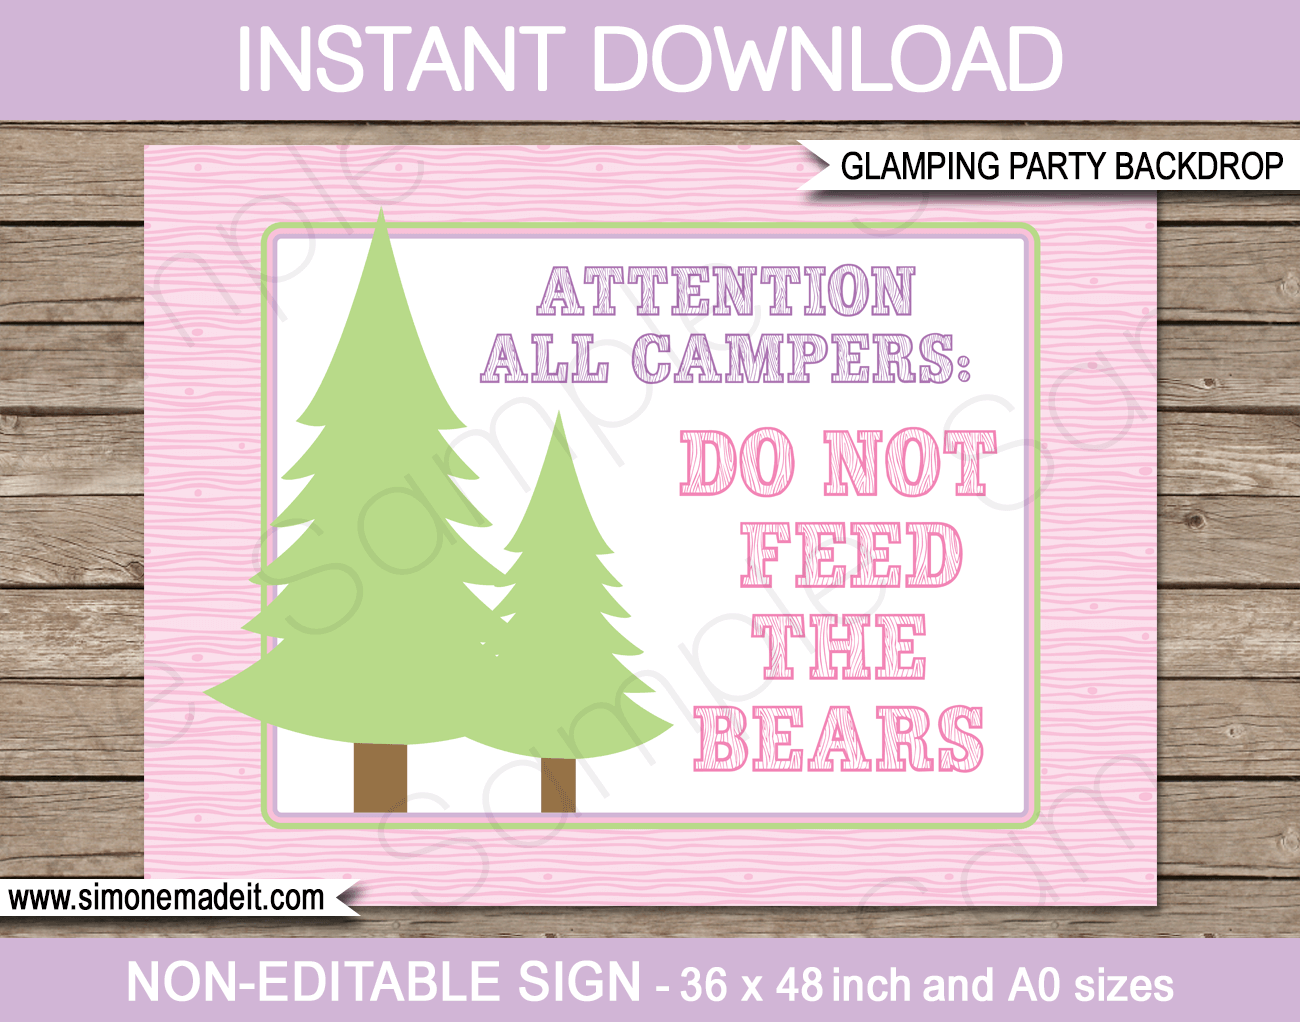 Glamping Party Backdrop or Sign | Printable DIY Template | Party Decorations | 36x48 inches | A0 | $4.50 Instant Download via SIMONEmadeit.com